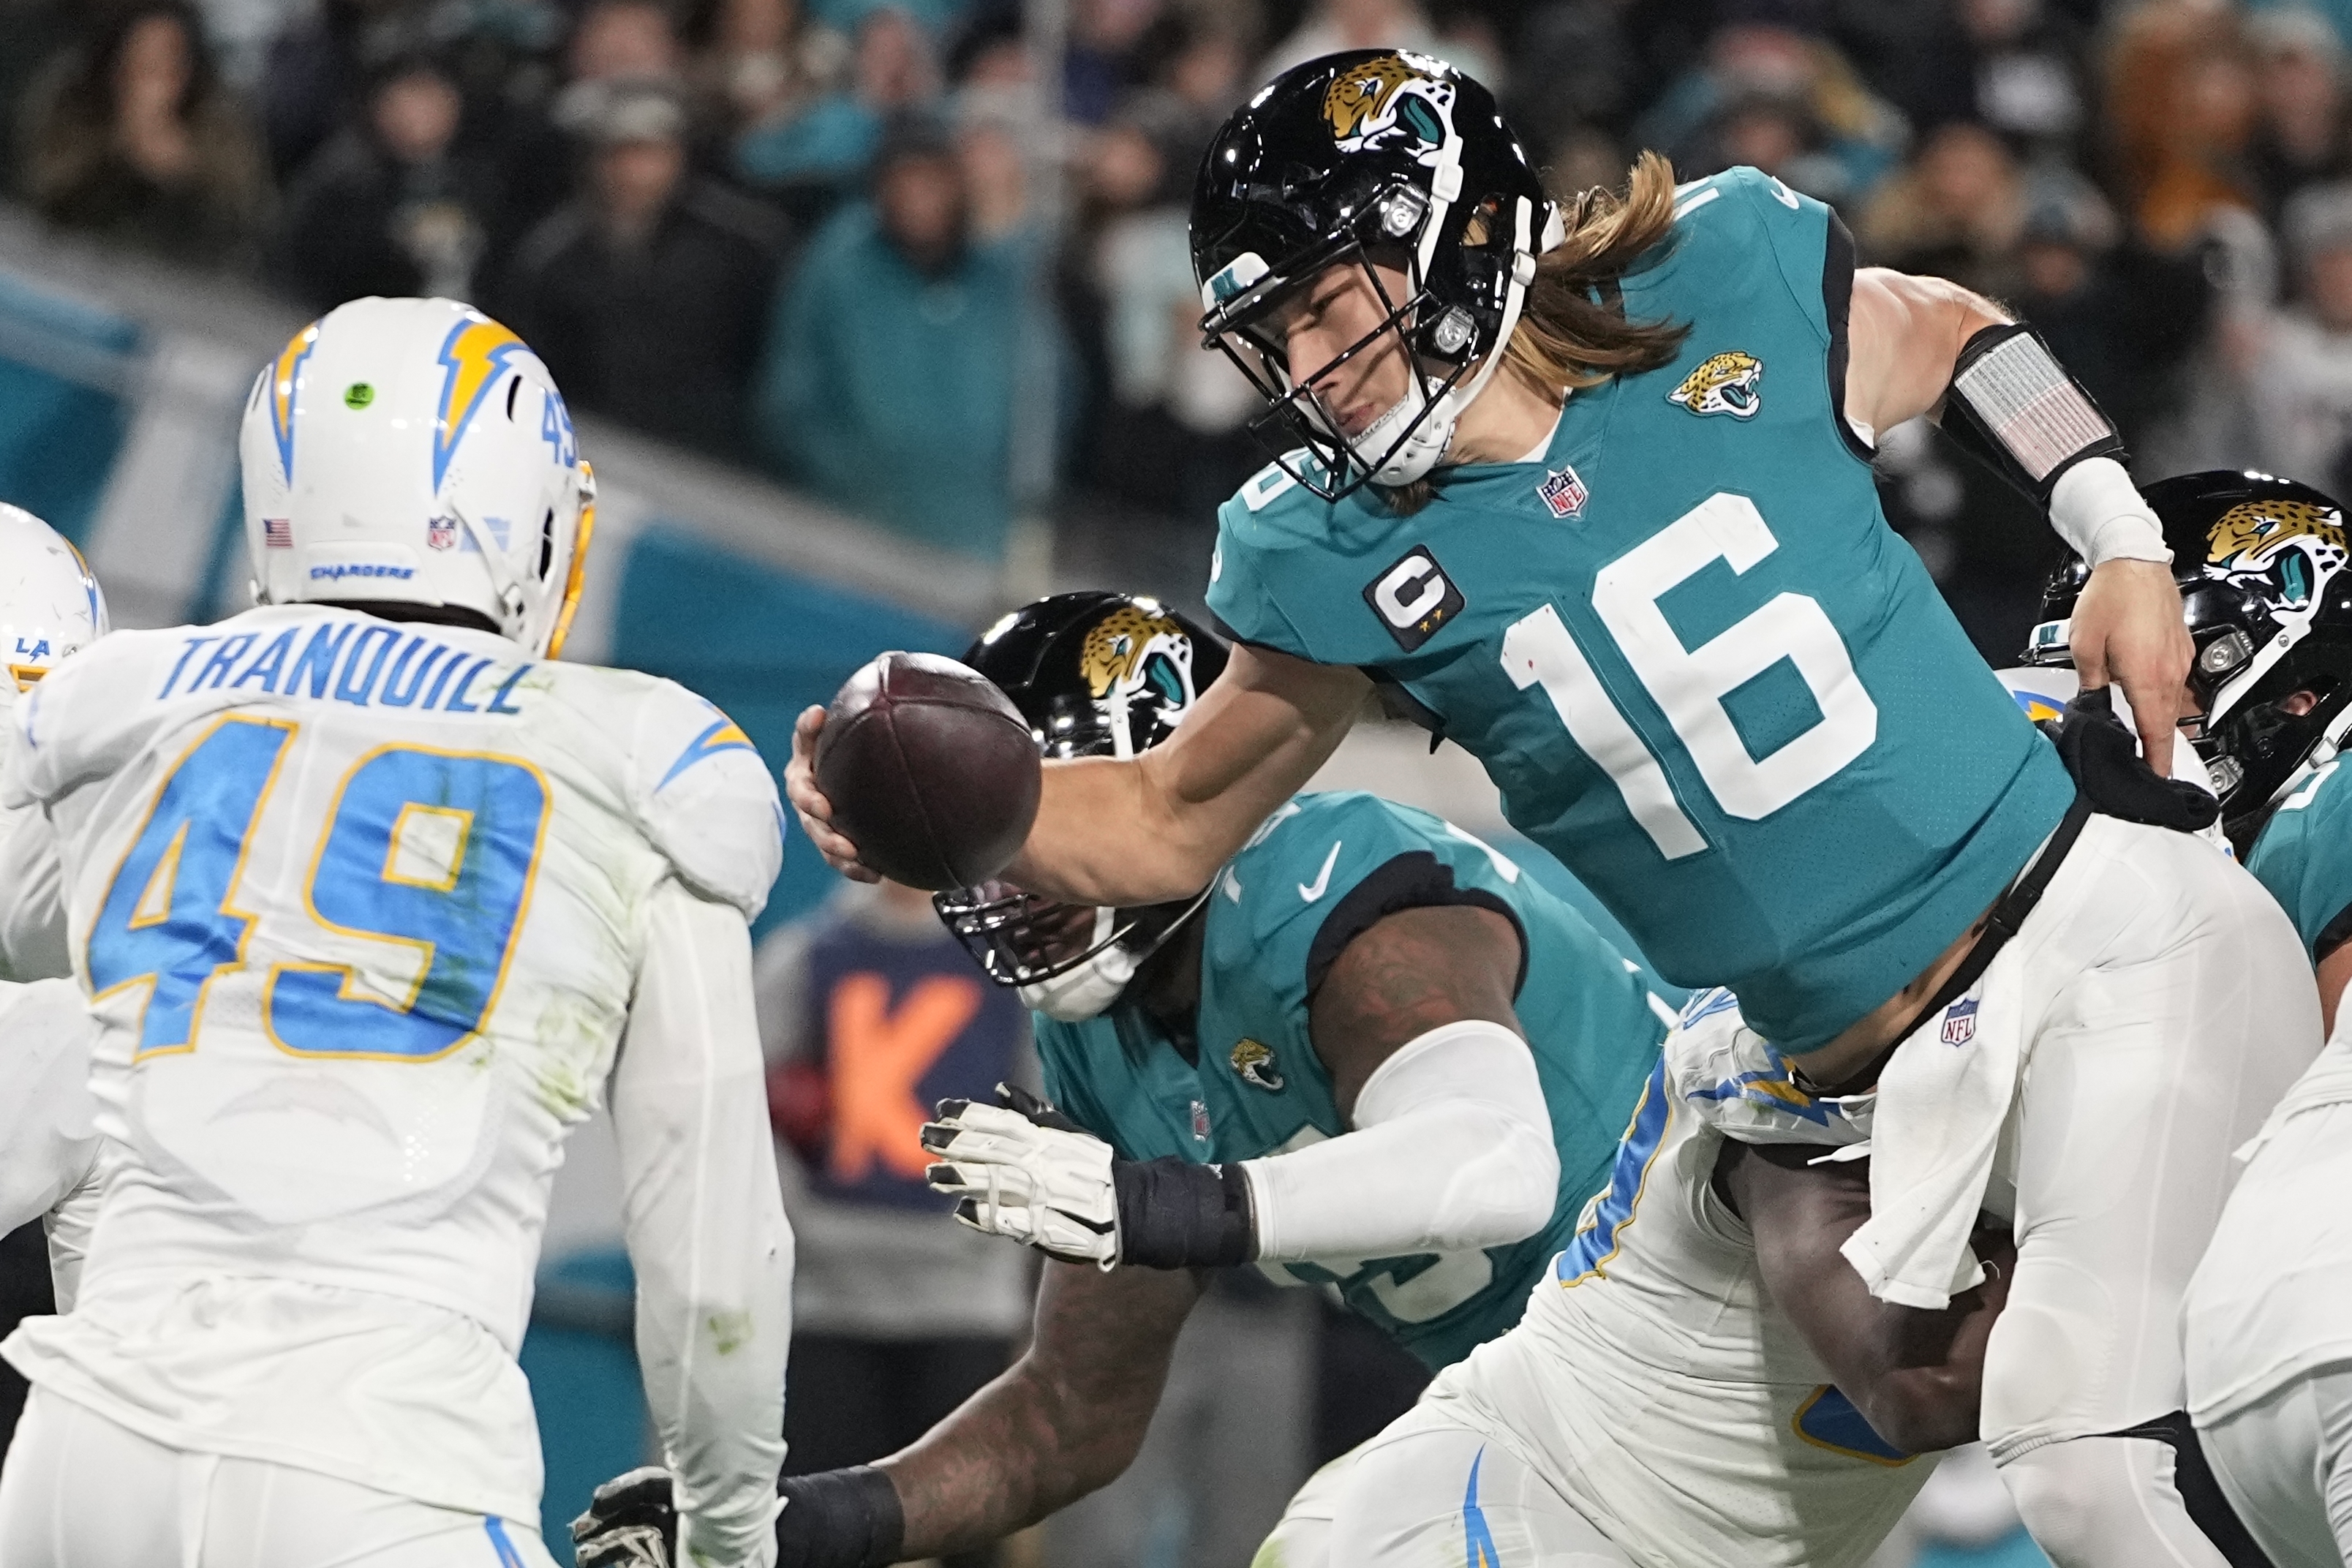 Lawrence rallies Jaguars from 27 down to beat Chargers 31-30